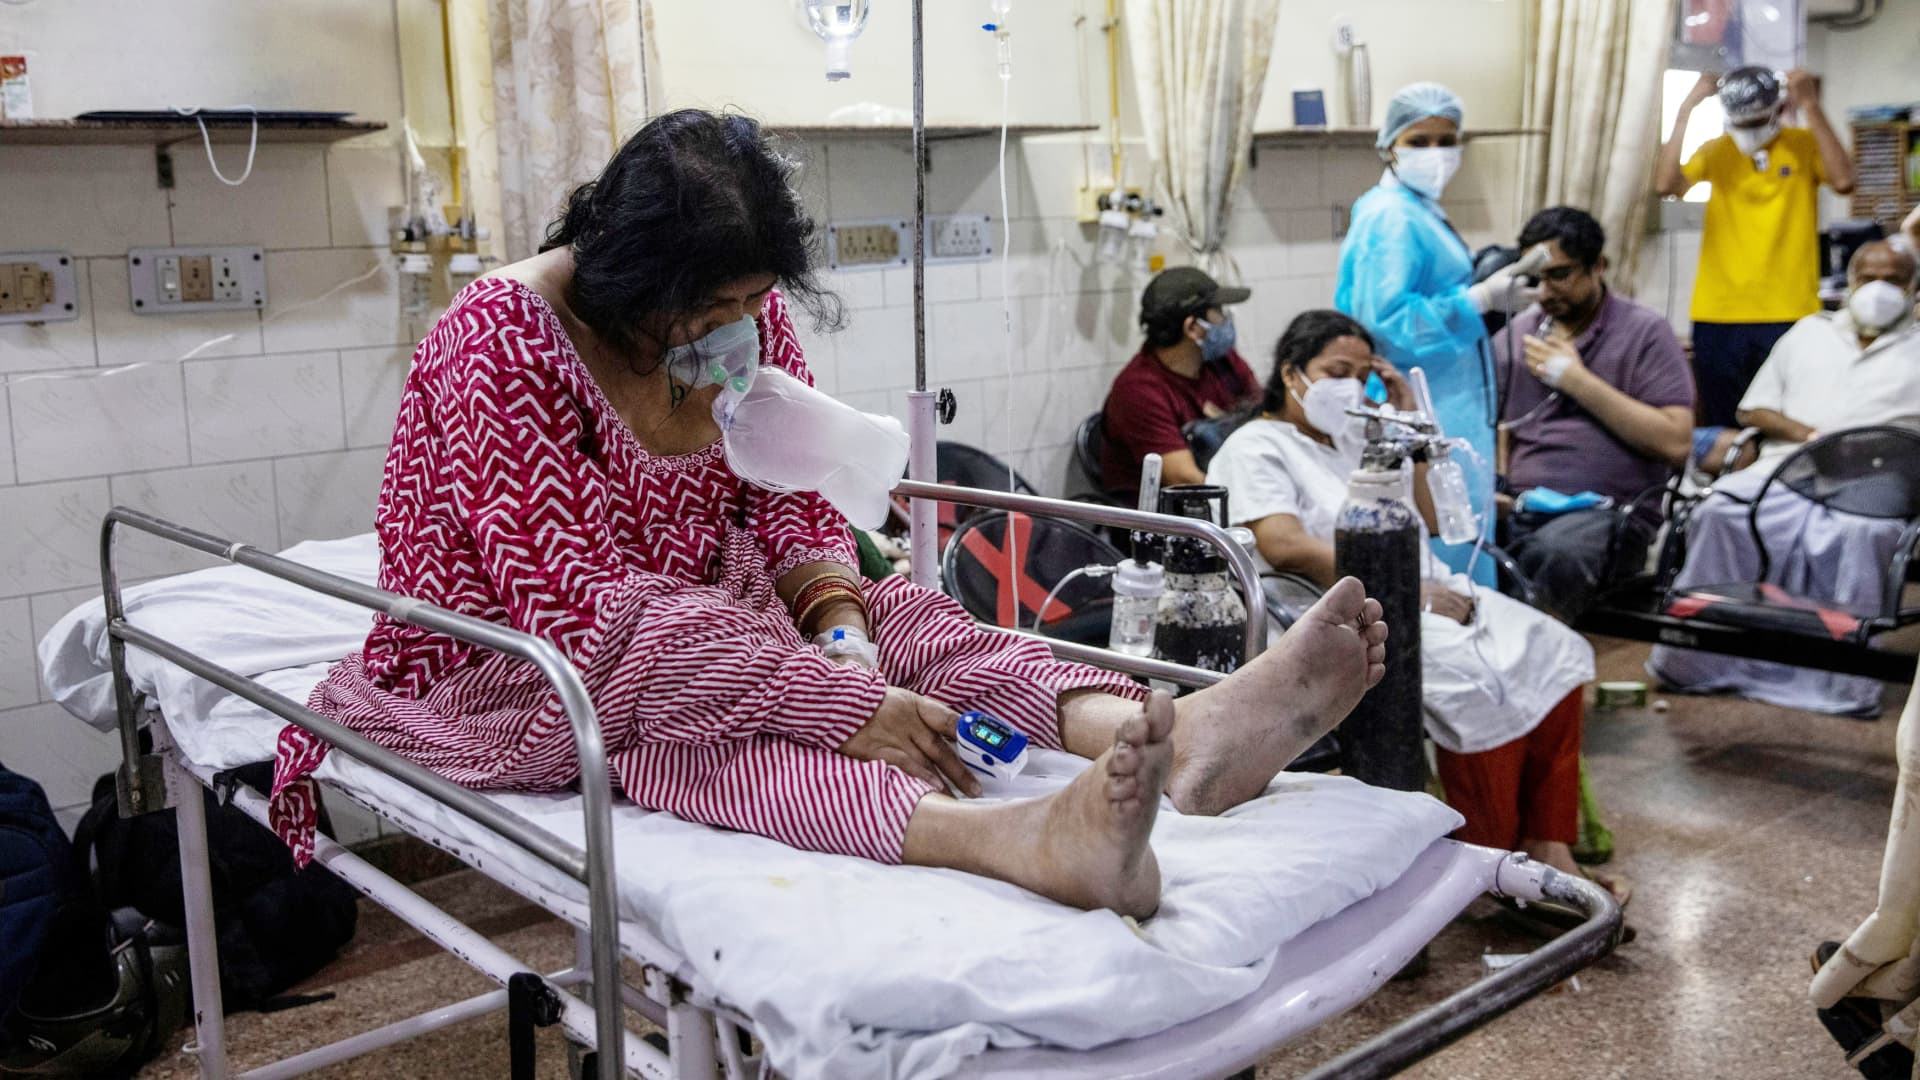 A patient suffering from the coronavirus disease (COVID-19) receives treatment inside the casualty ward at a hospital in New Delhi, India, May 1, 2021.